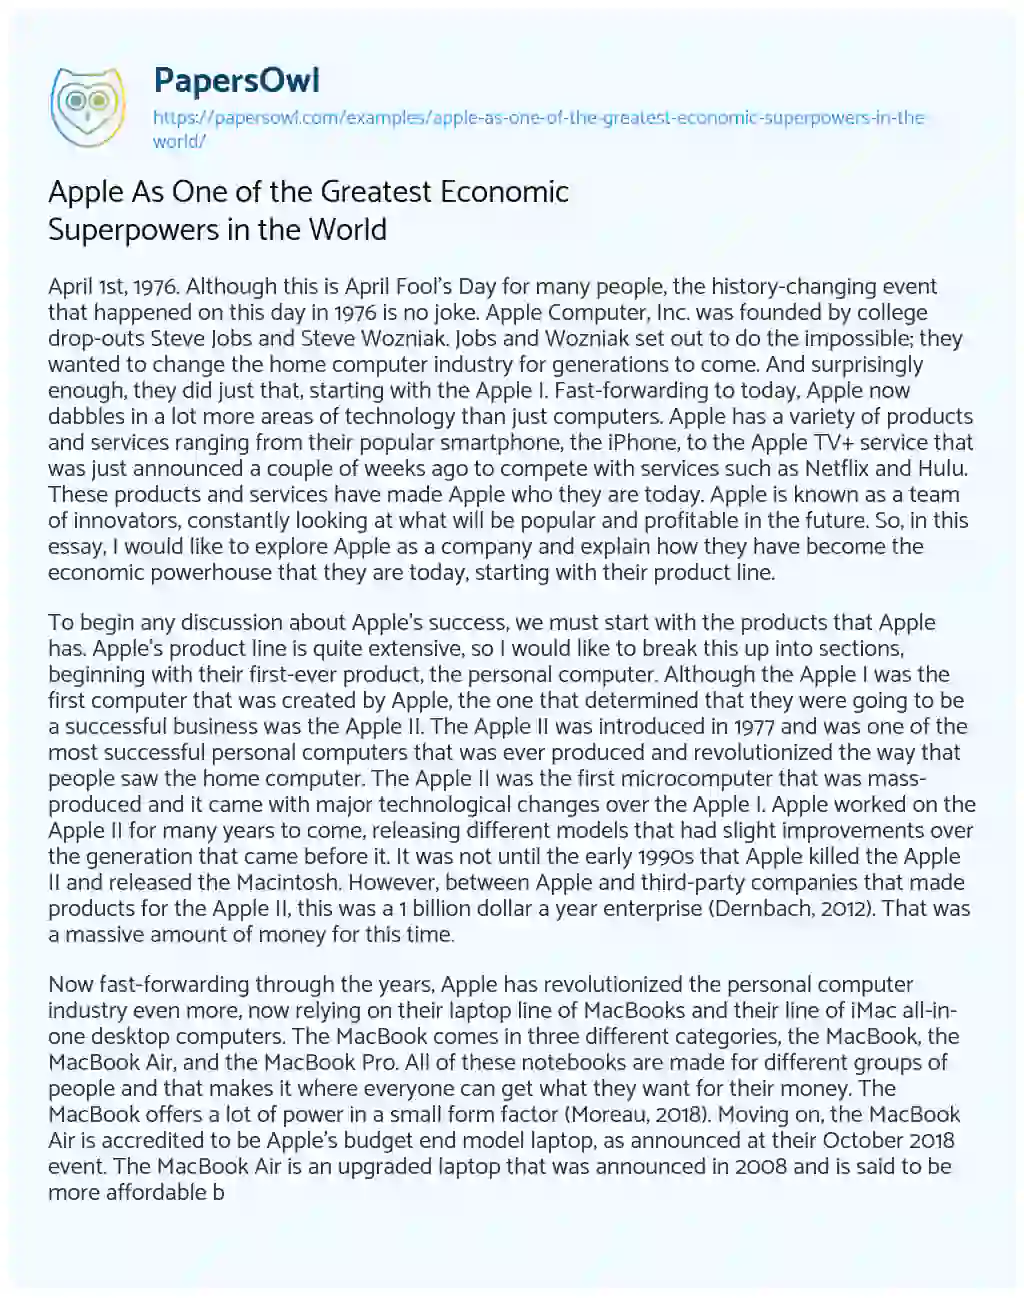 Essay on Apple as One of the Greatest Economic Superpowers in the World